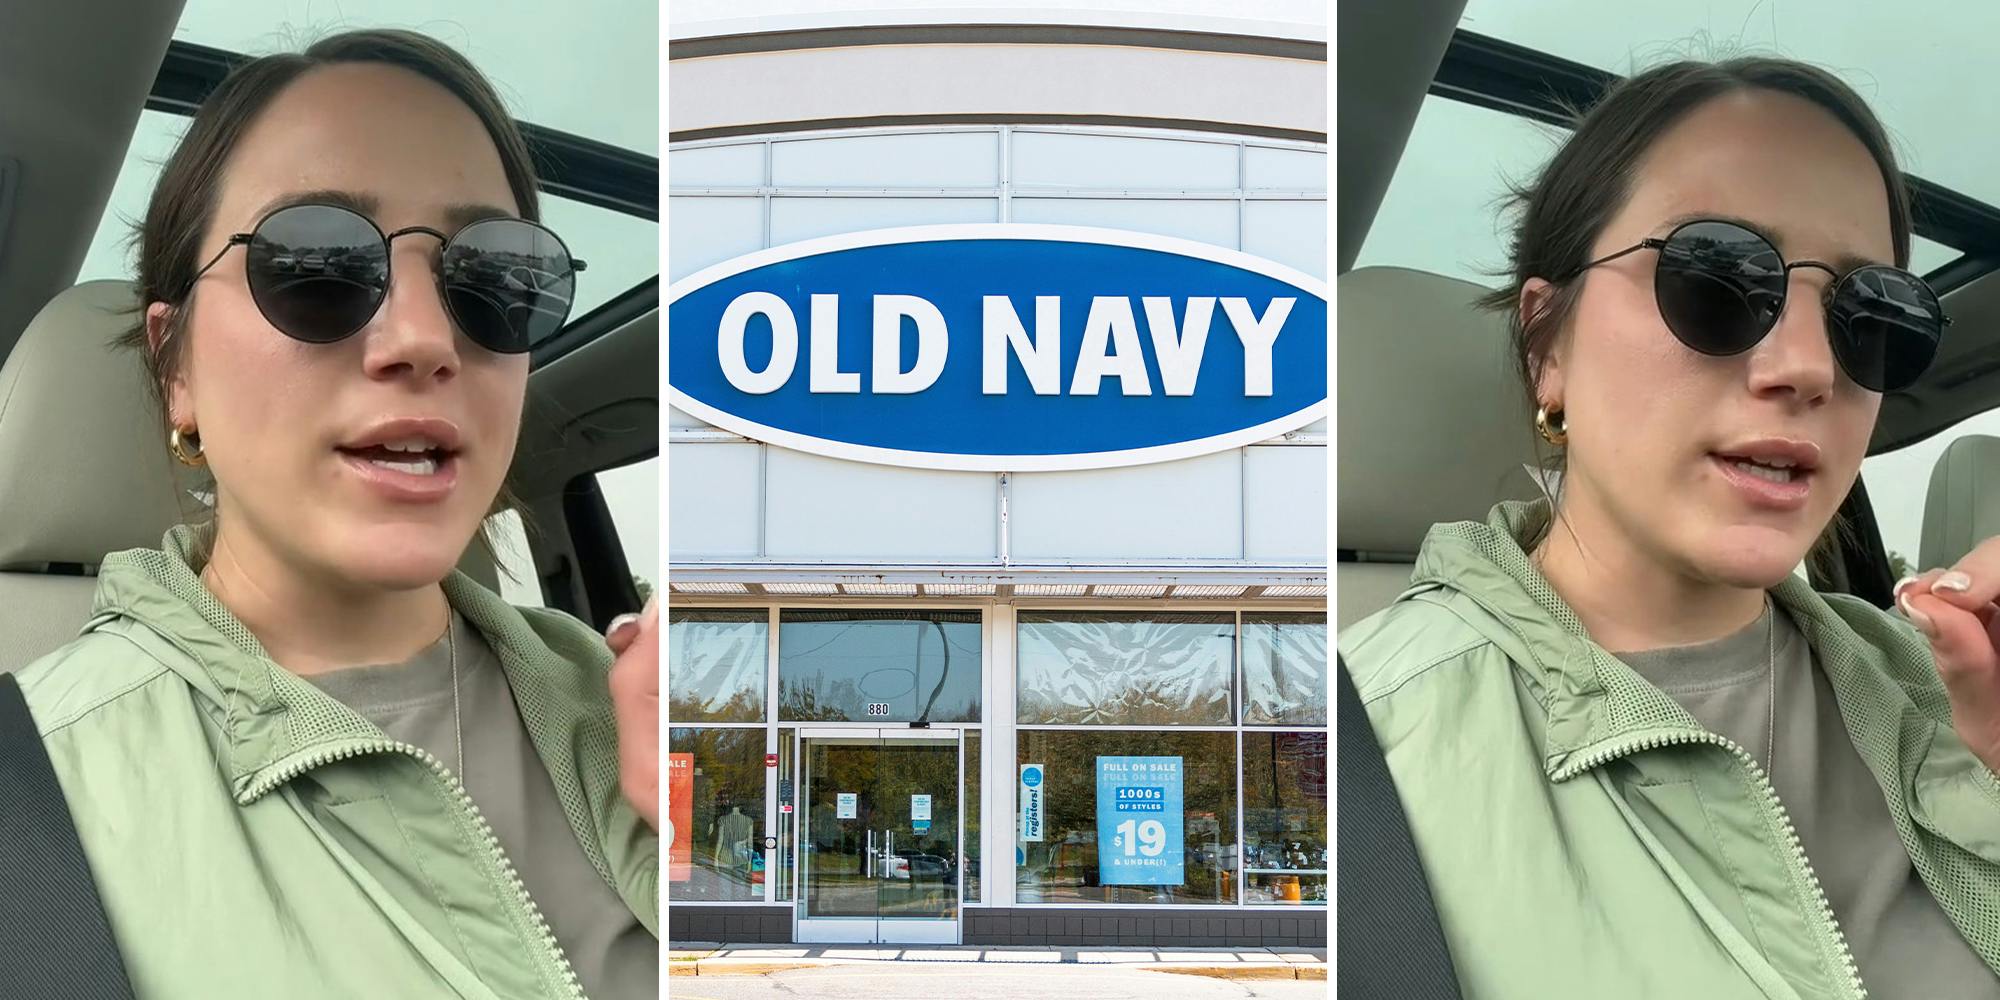 Shopper catches Old Navy pricing items in-store higher